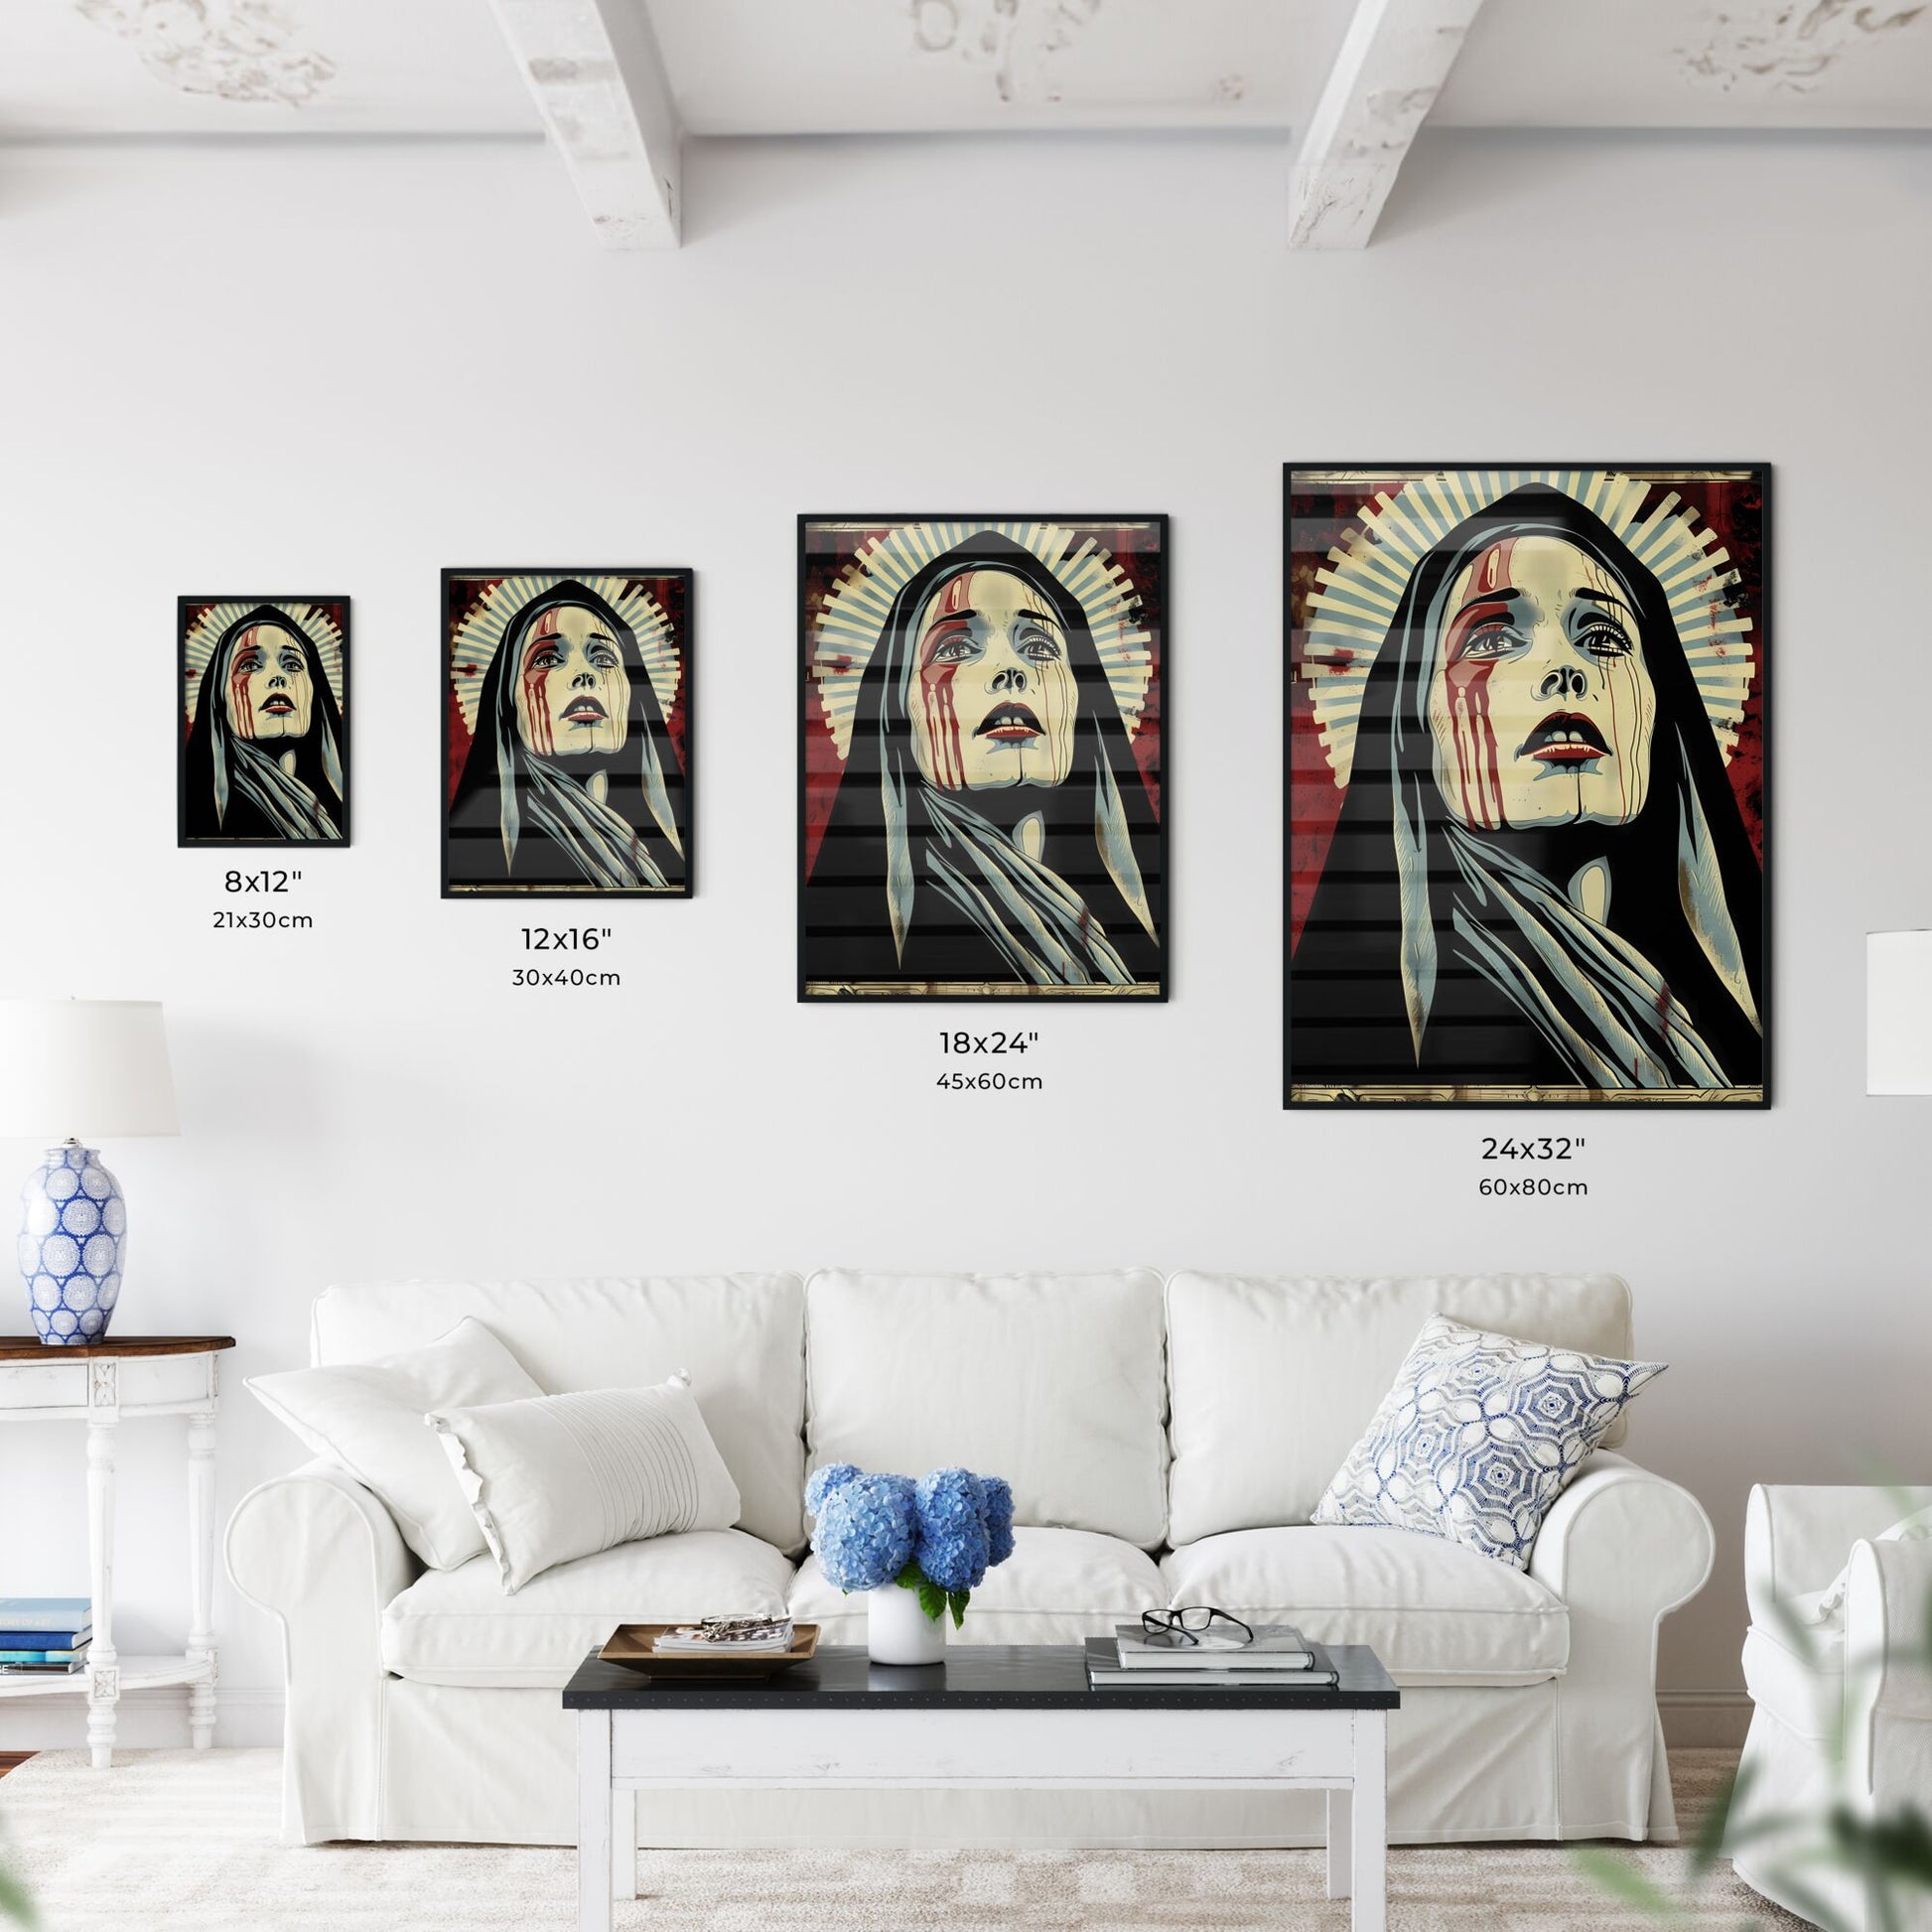 Pop Art Vectorized Religious Occult Gothic Horror Movie Stock Image Concept of Virgin Mary With Blood on Face Default Title